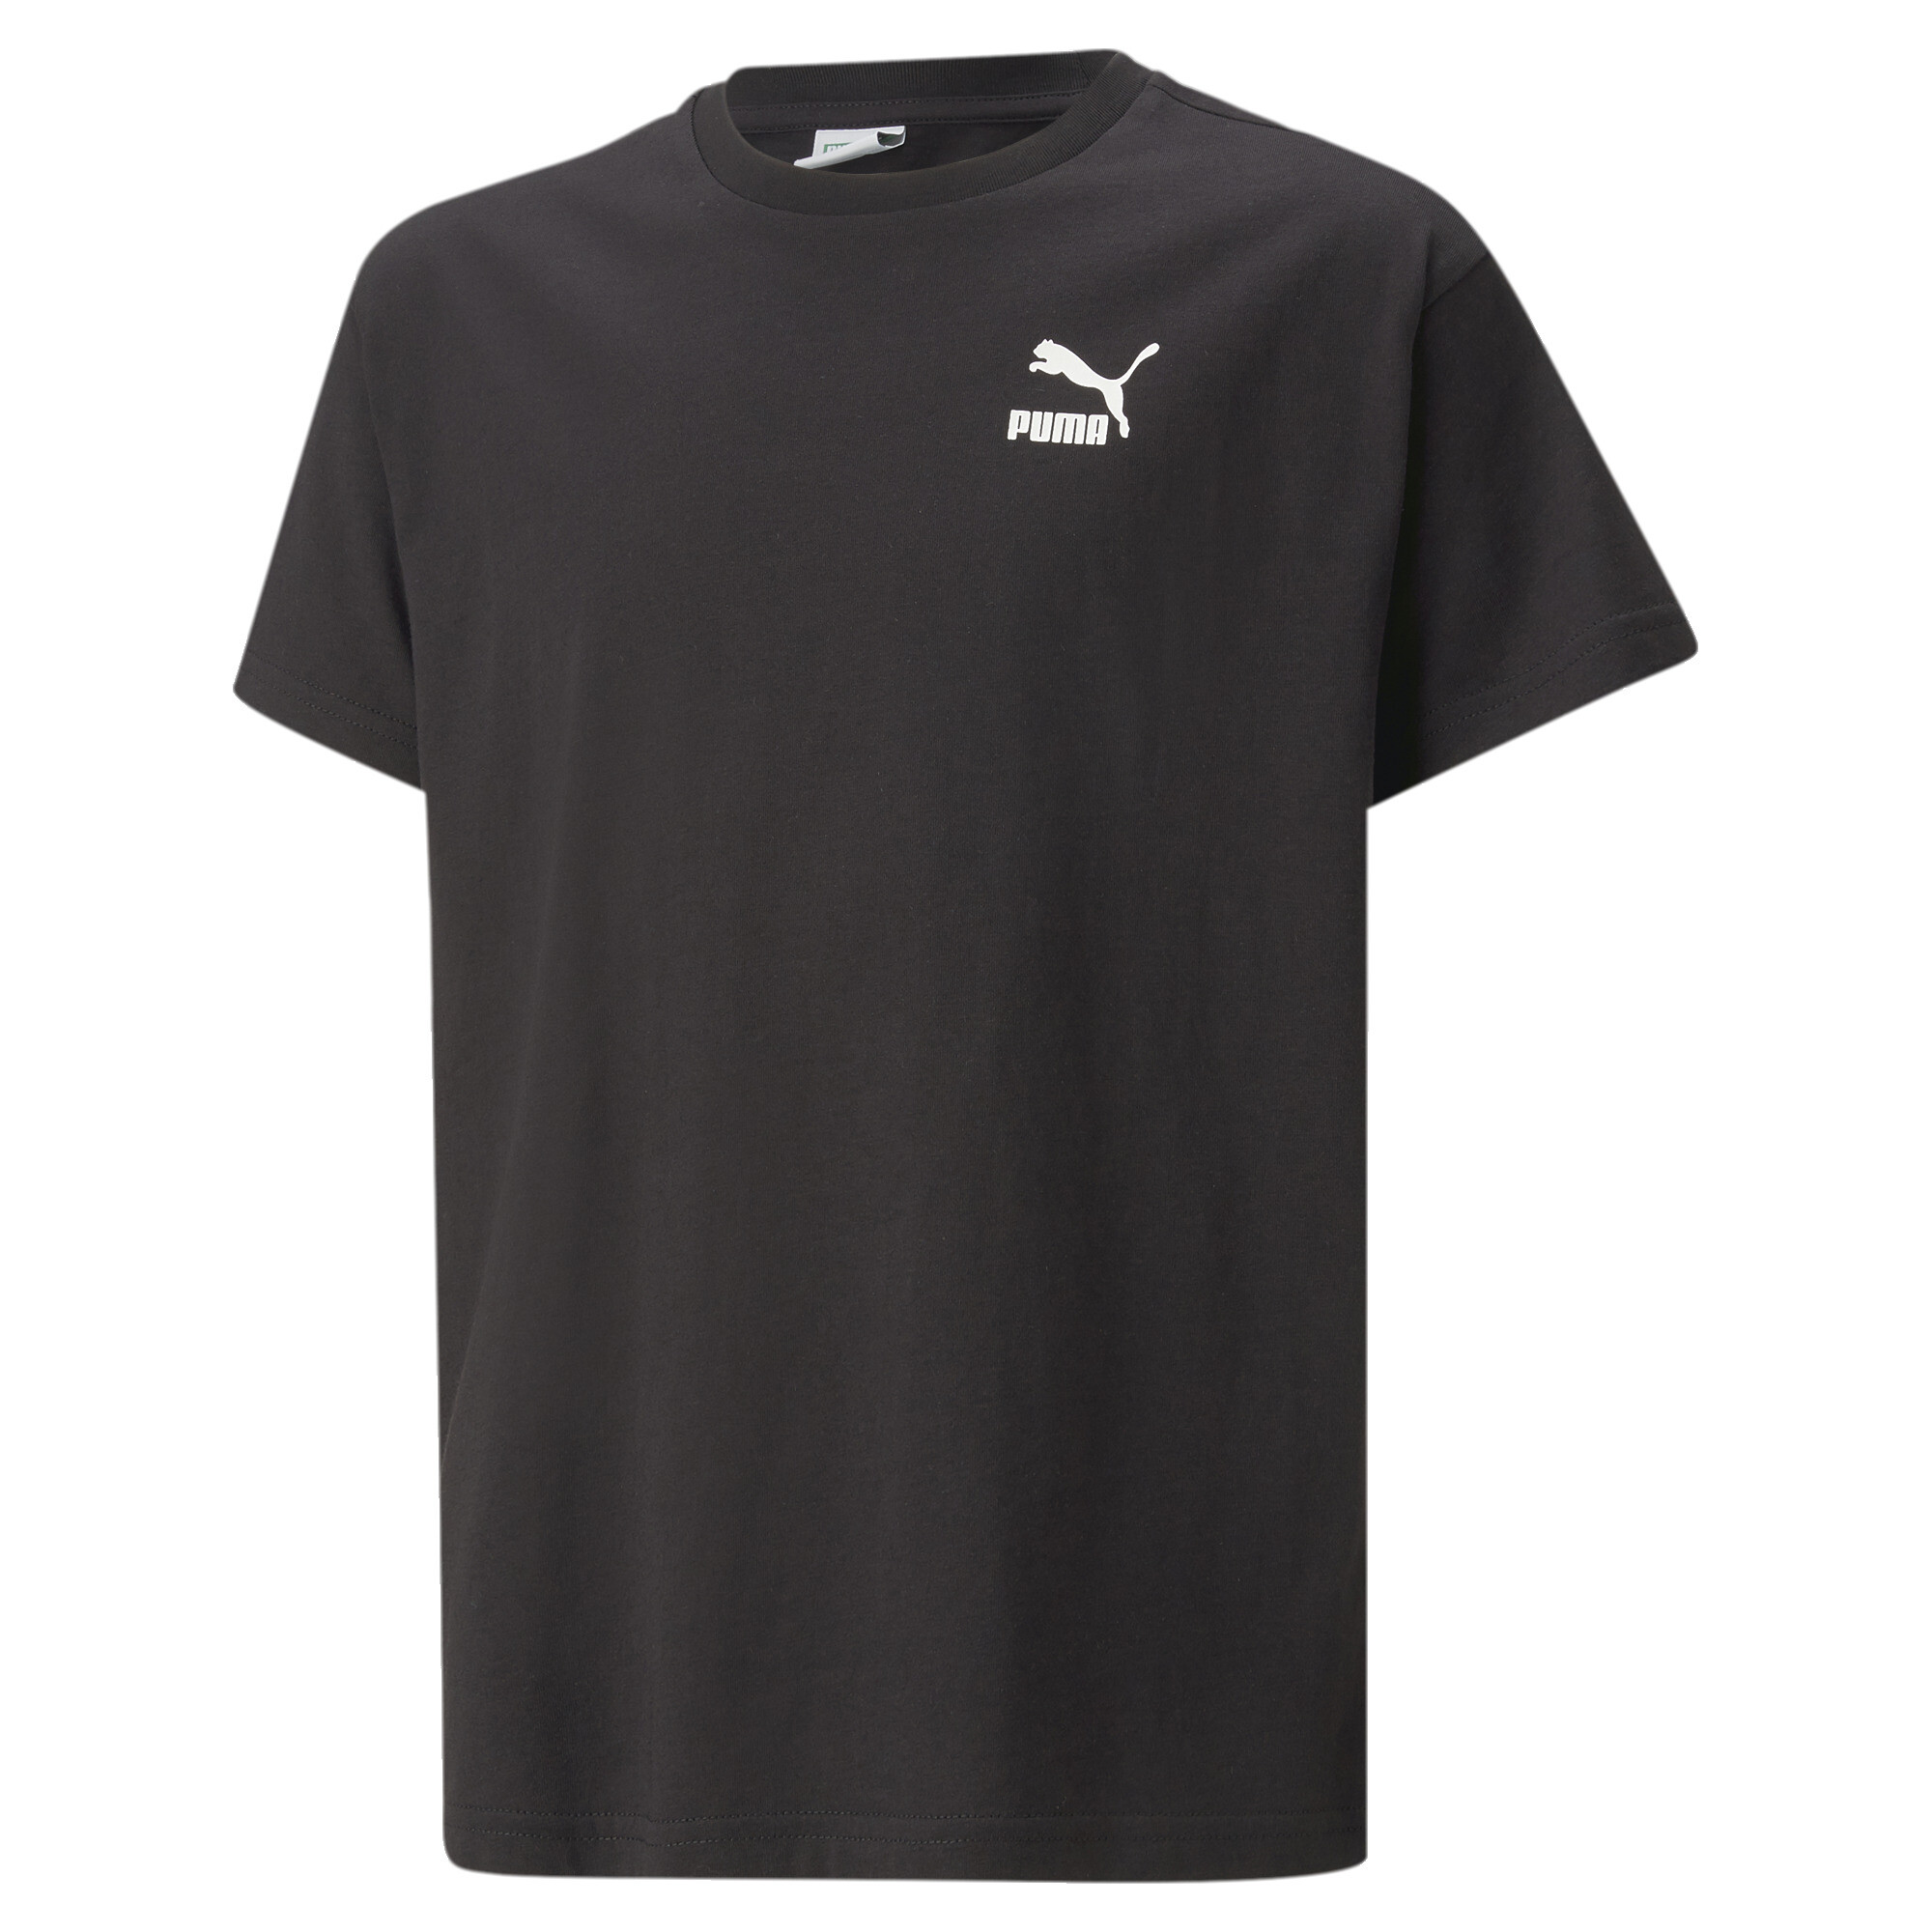 Puma Classics Relaxed Tee Youth, Black, Size 11-12Y, Age